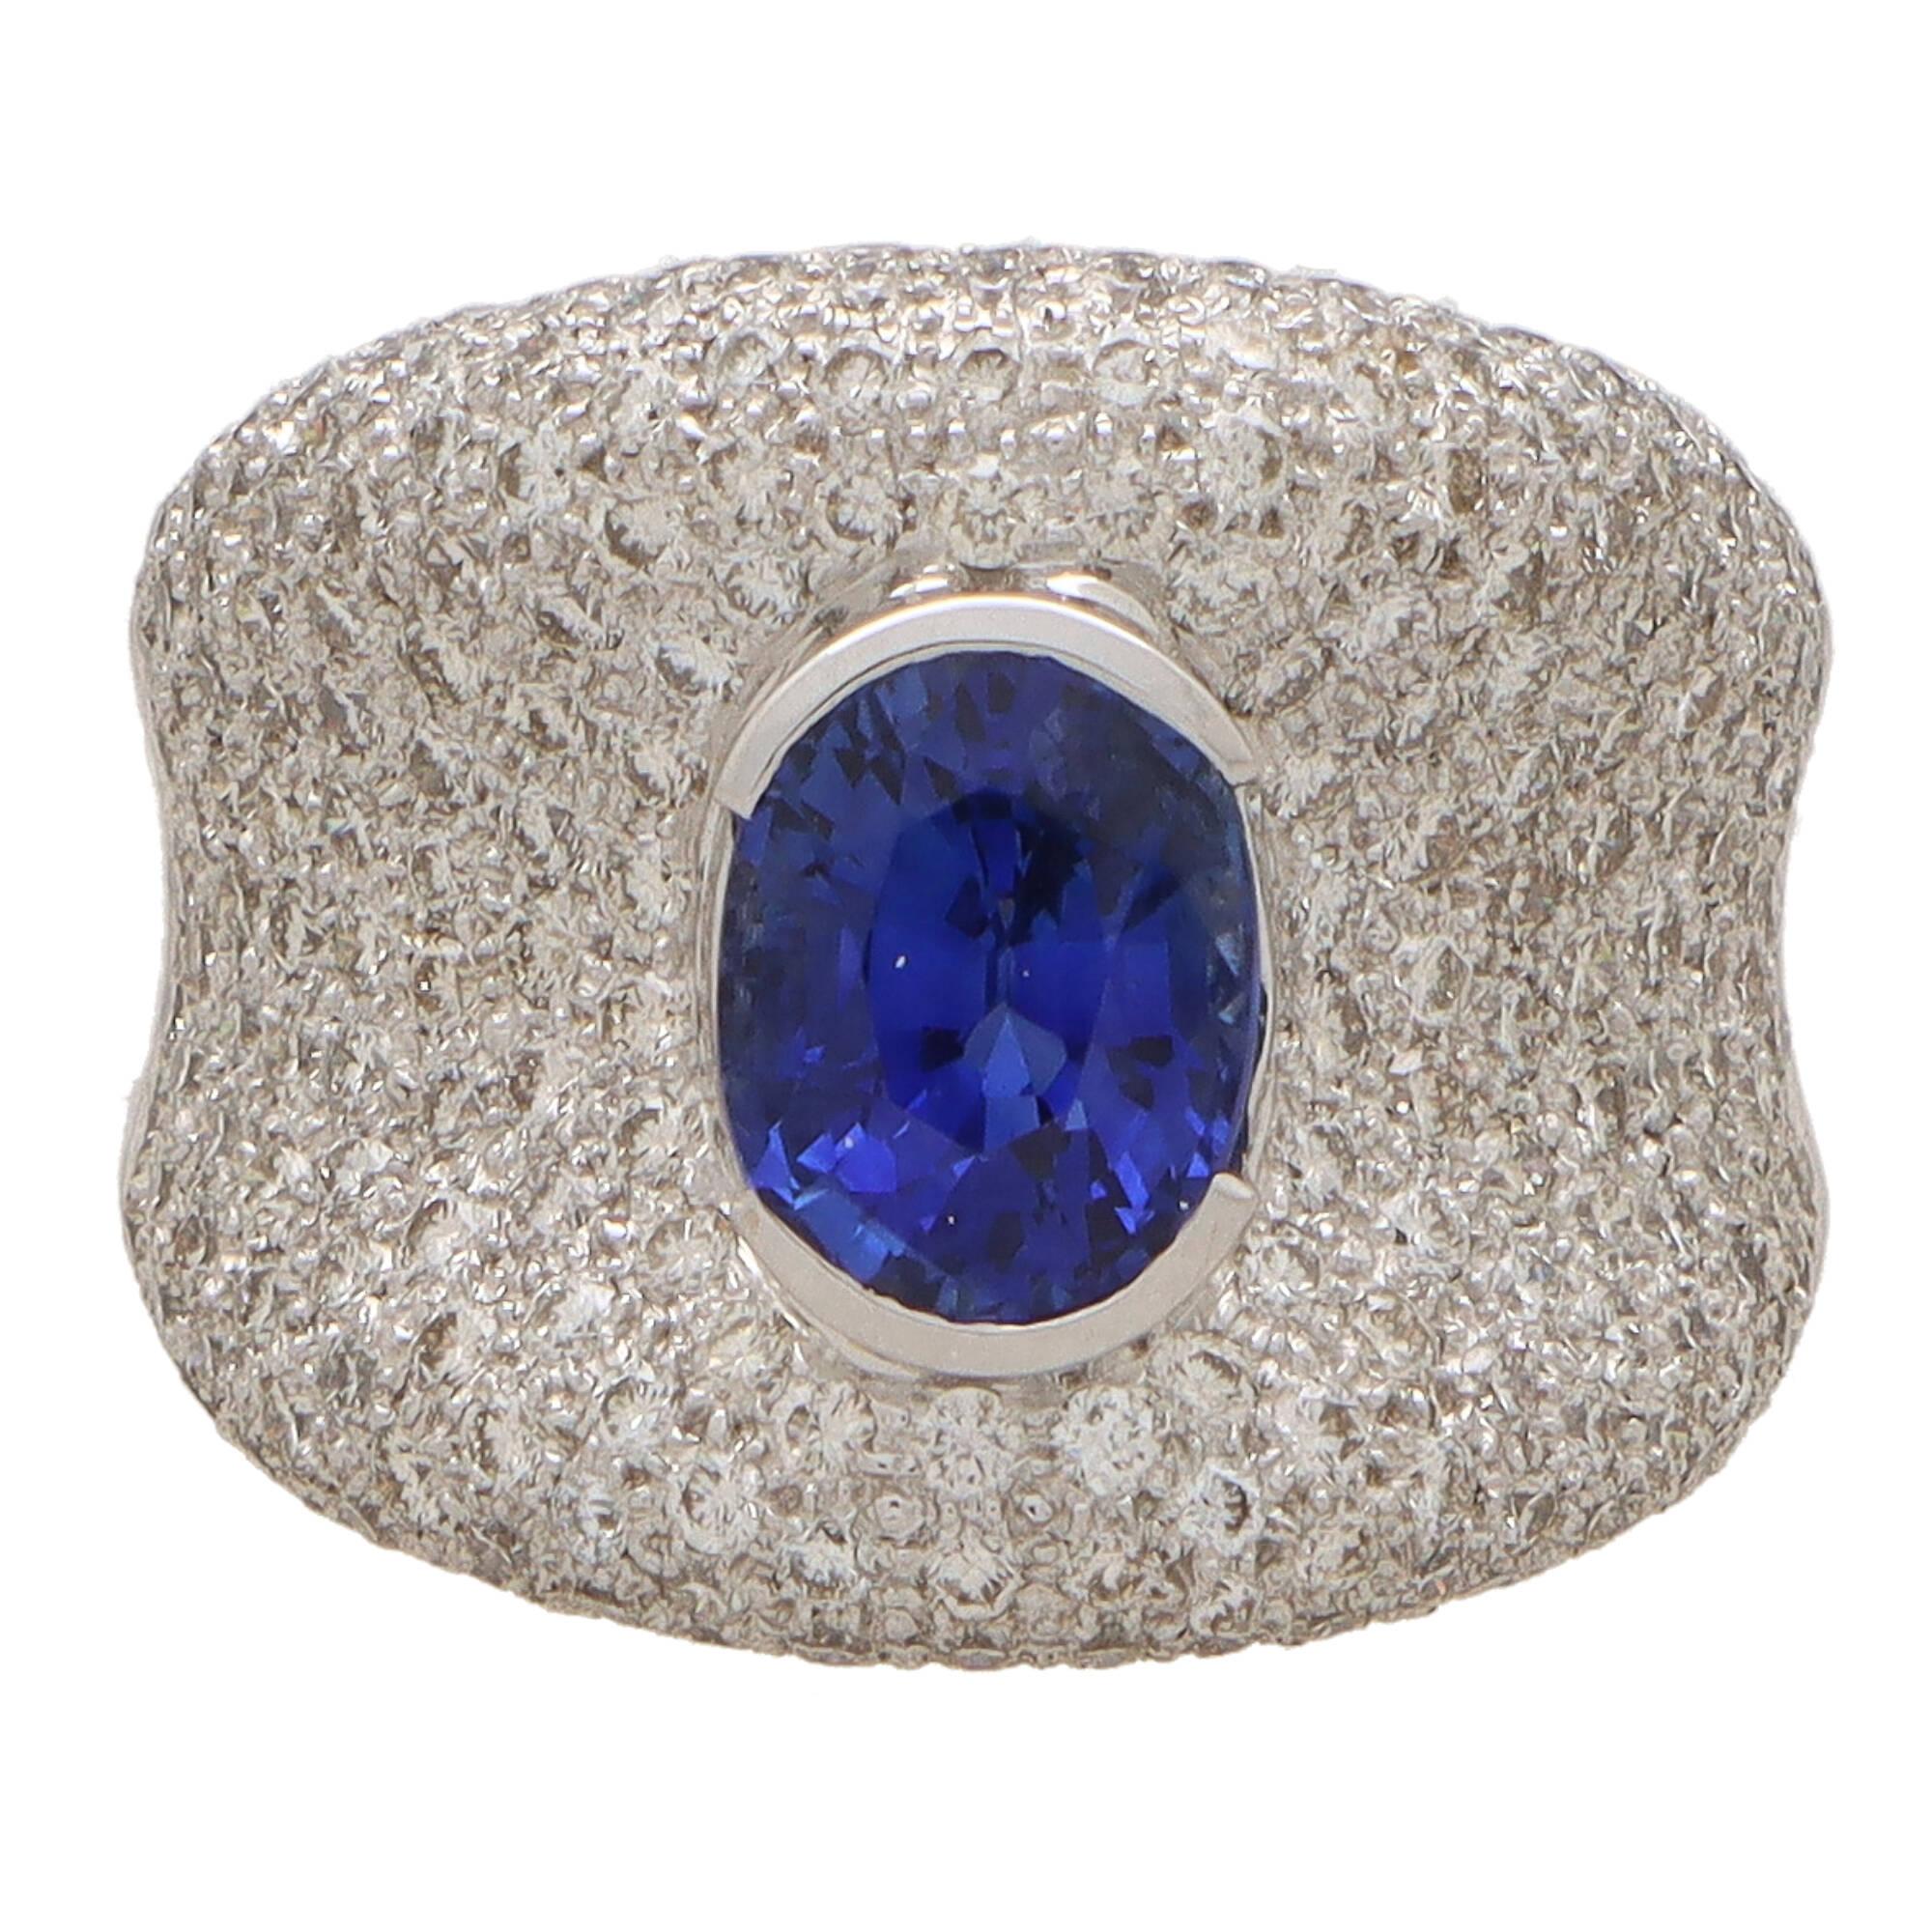 Modern Vintage Blue Sapphire and Diamond Bombe Dress Ring in 18k White Gold For Sale